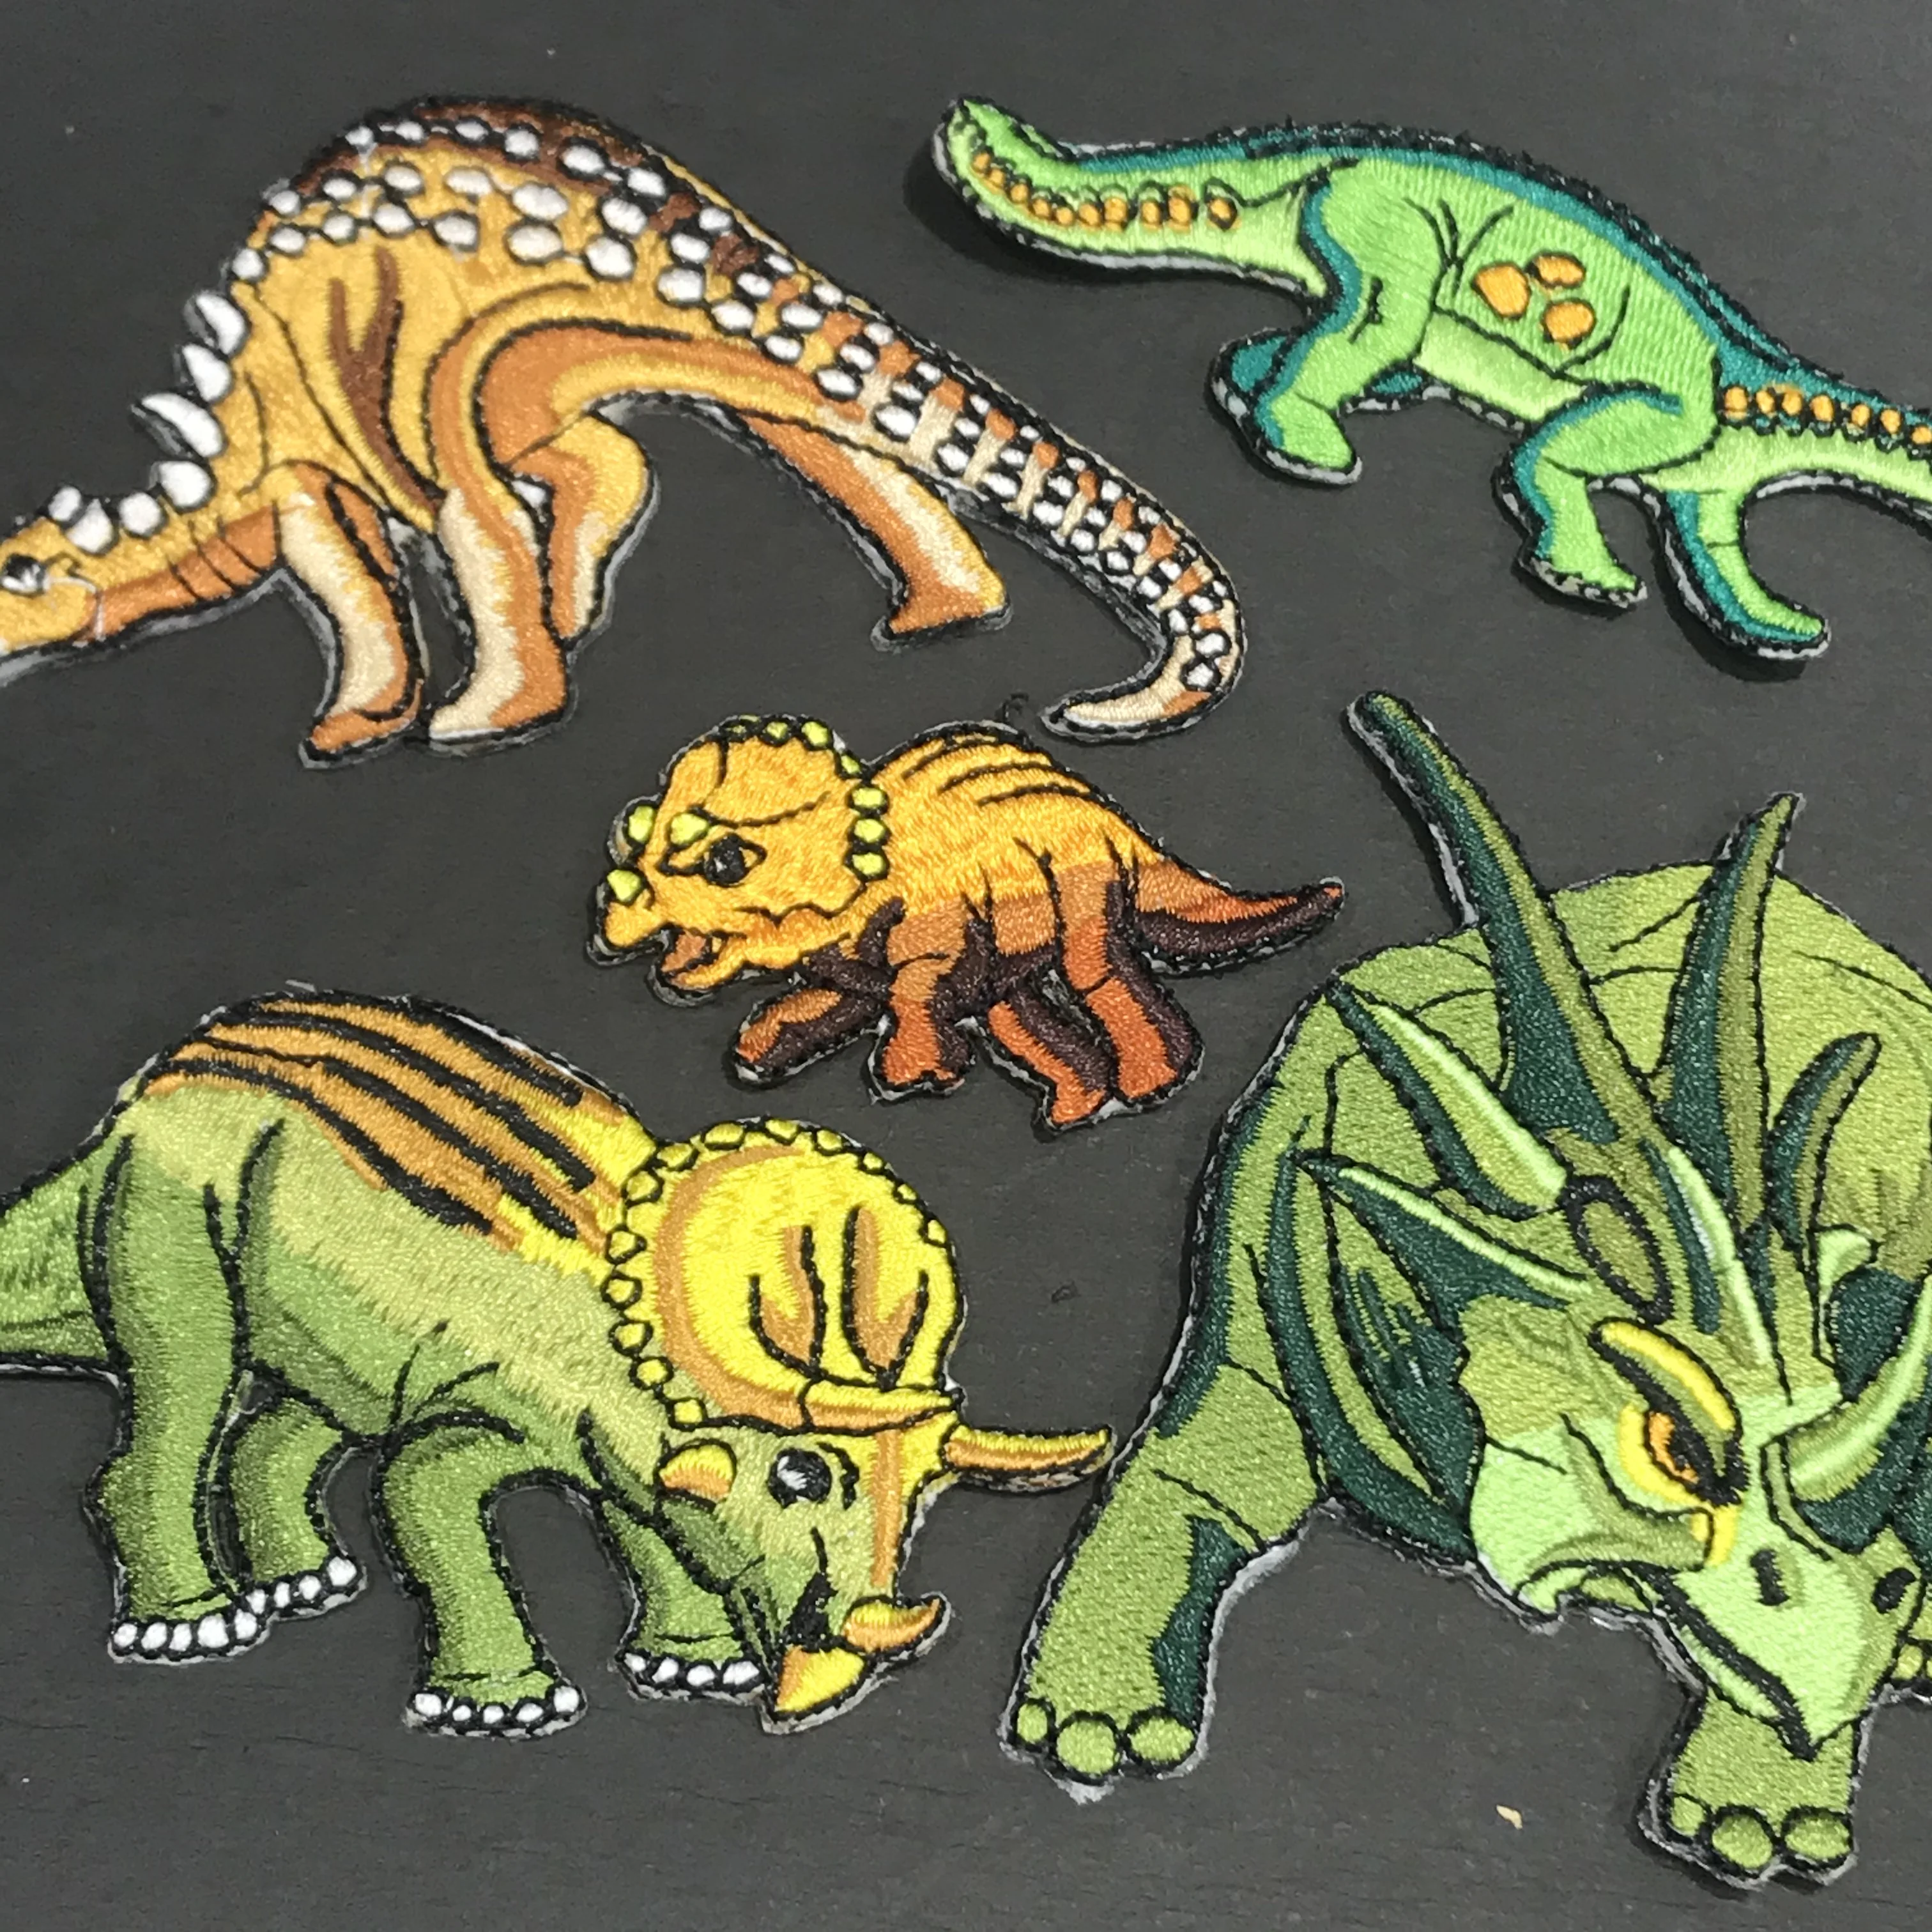 

5Pcs Animal Dinosaur Embroidery Sew On Patches Sewn Applique Badge Craft Embroidered DIY For Clothes Trousers Clothing Sticker